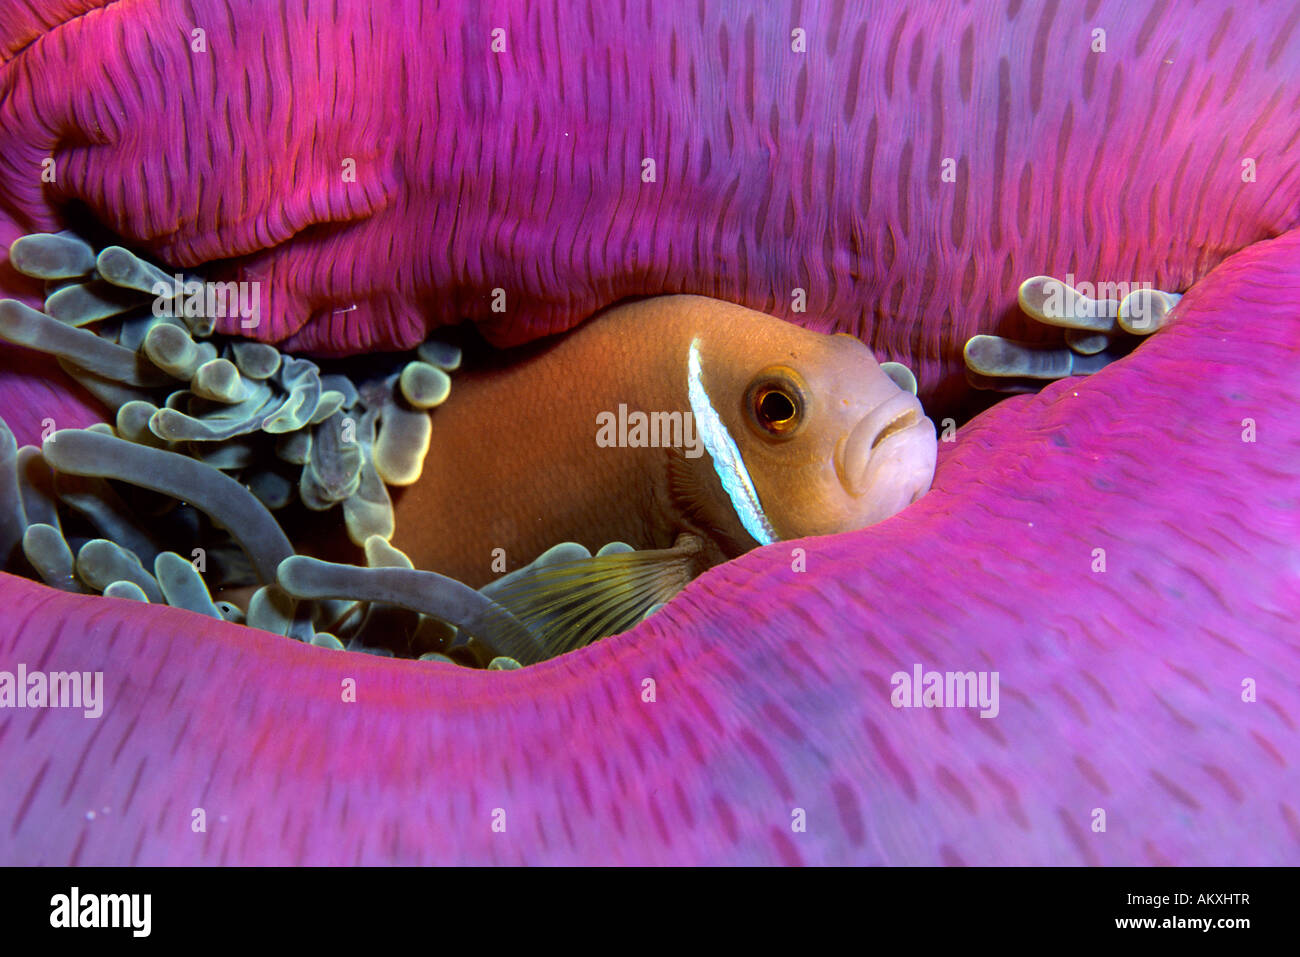 White-maned anemonefish or pink anemonefish, Amphiprion perideraion. Stock Photo